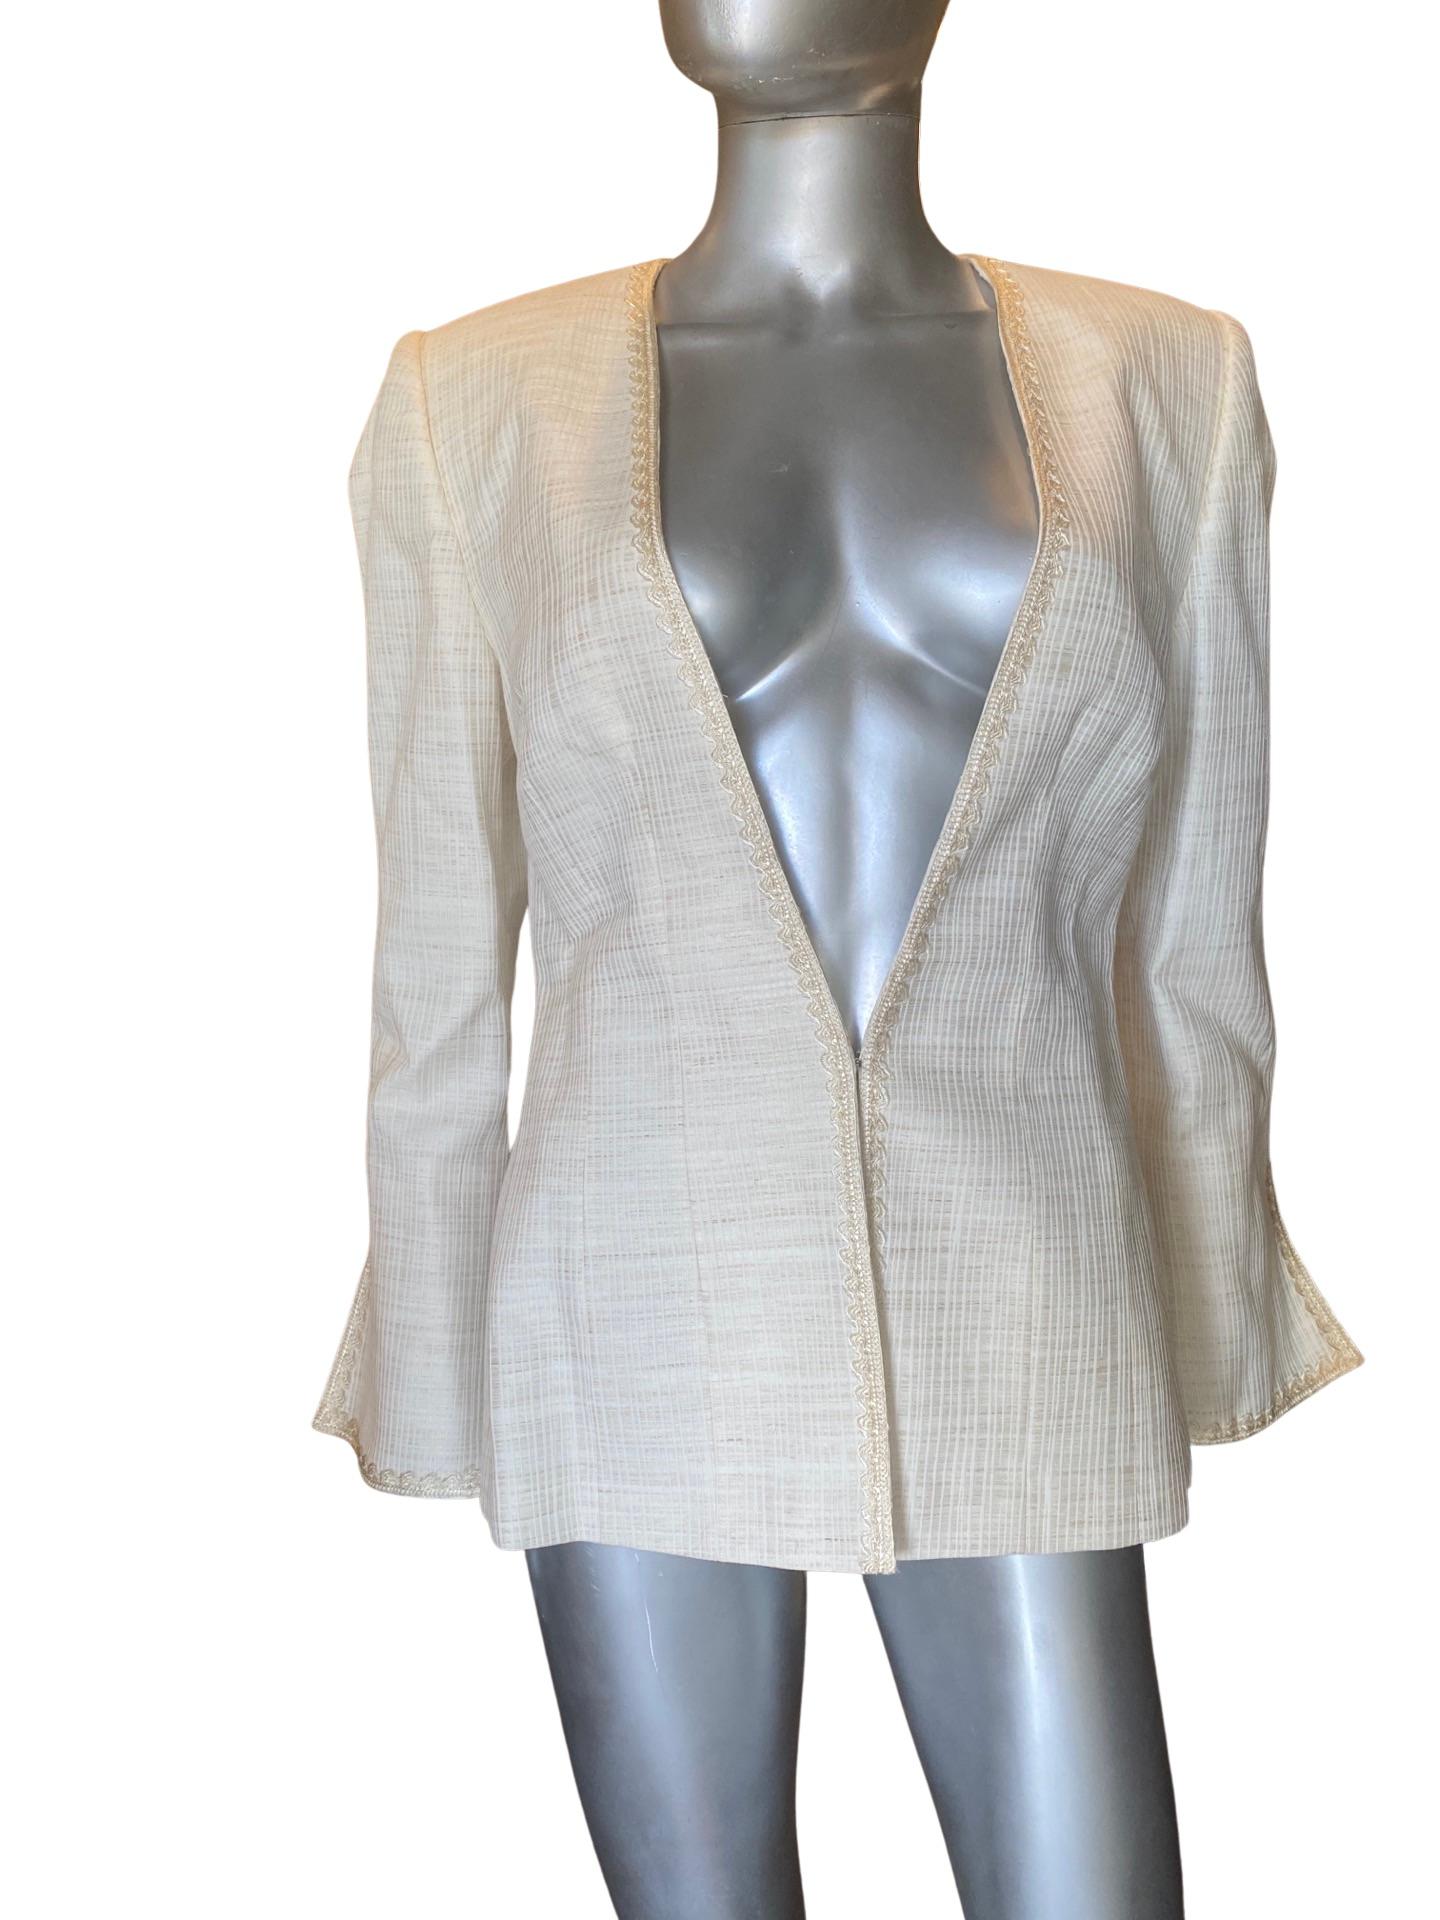 Fe Zandi Chic Custom Made Embroidered Linen Blend Jacket Size 12 In Excellent Condition For Sale In Palm Springs, CA